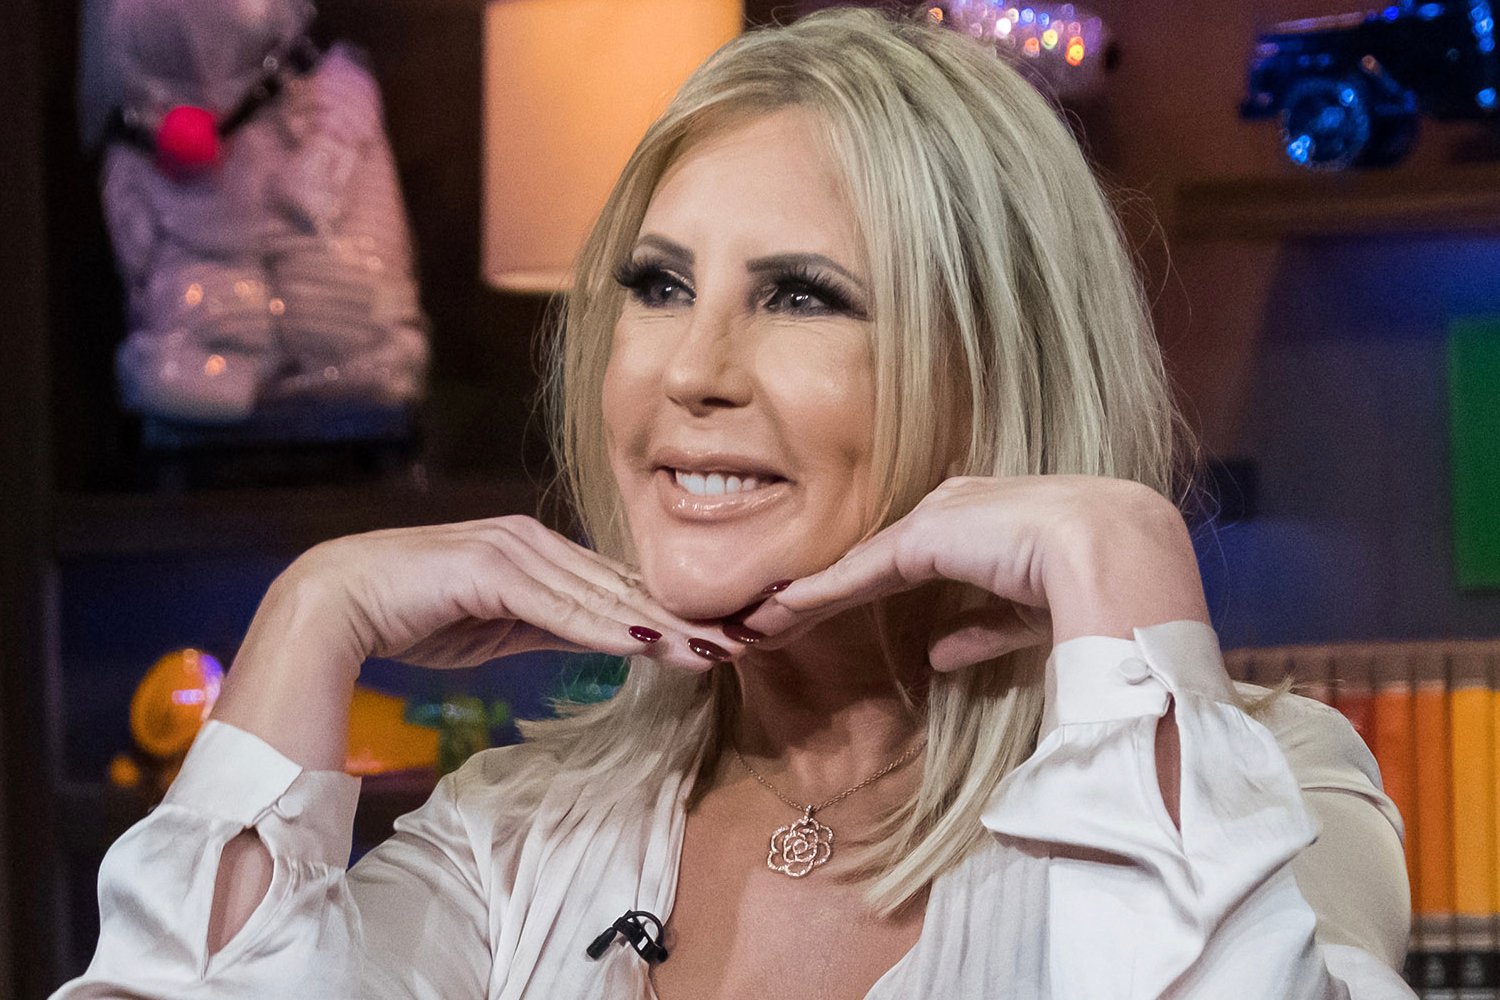 Vicki Gunvalson during an appearance on 'Watch What Happens Live'